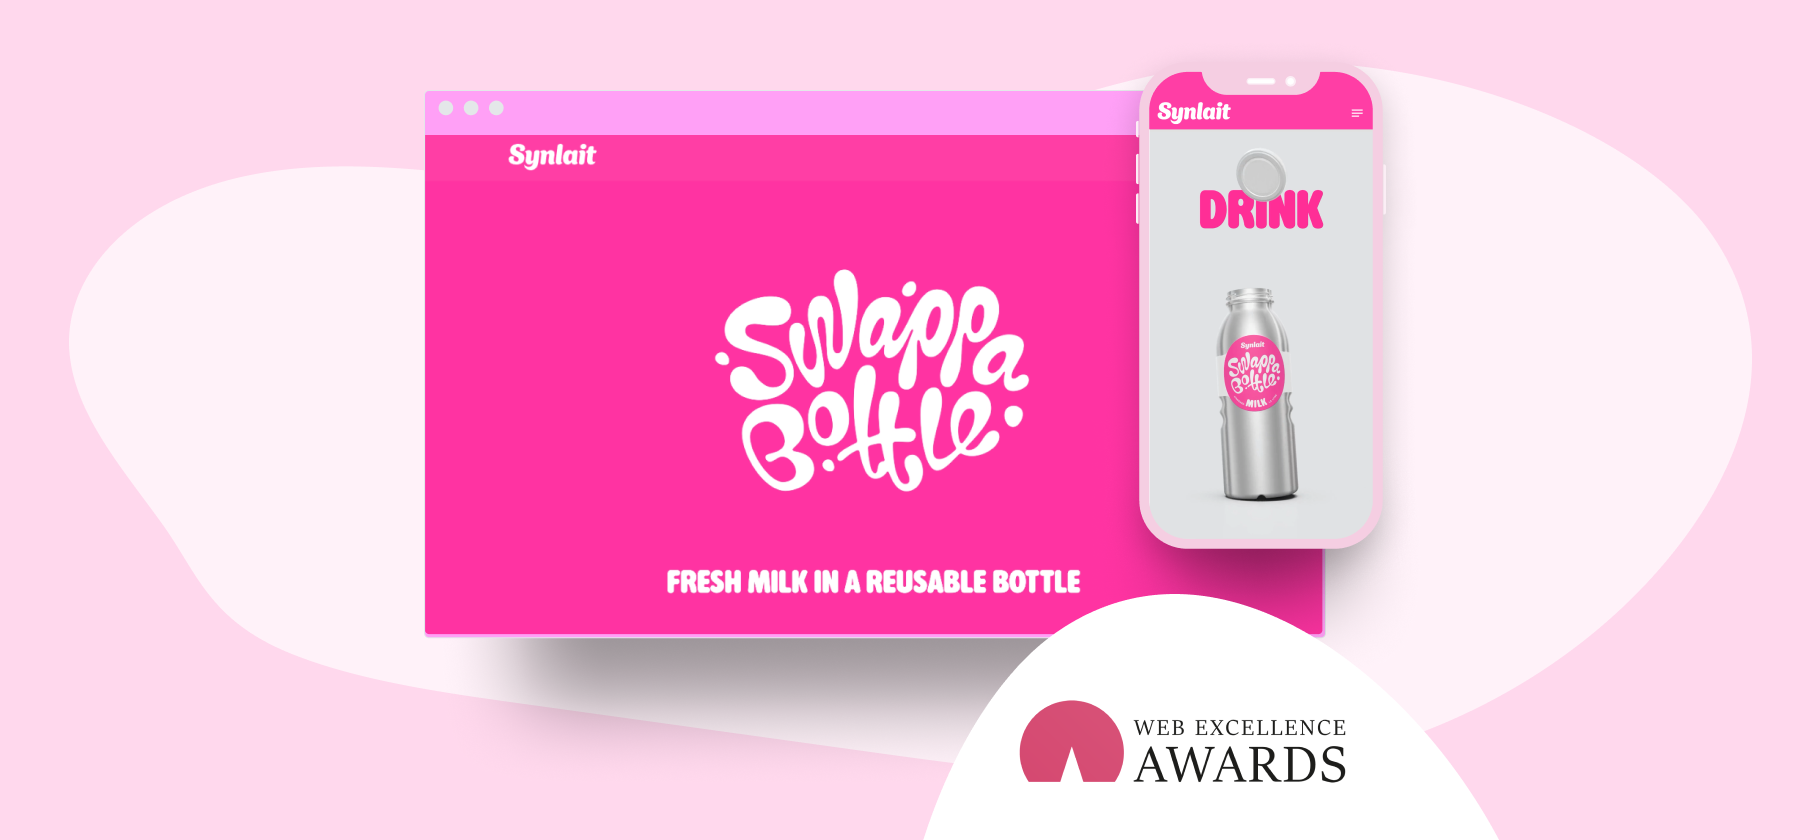 The Synlait Swappa Bottle: A Disruptive New Website